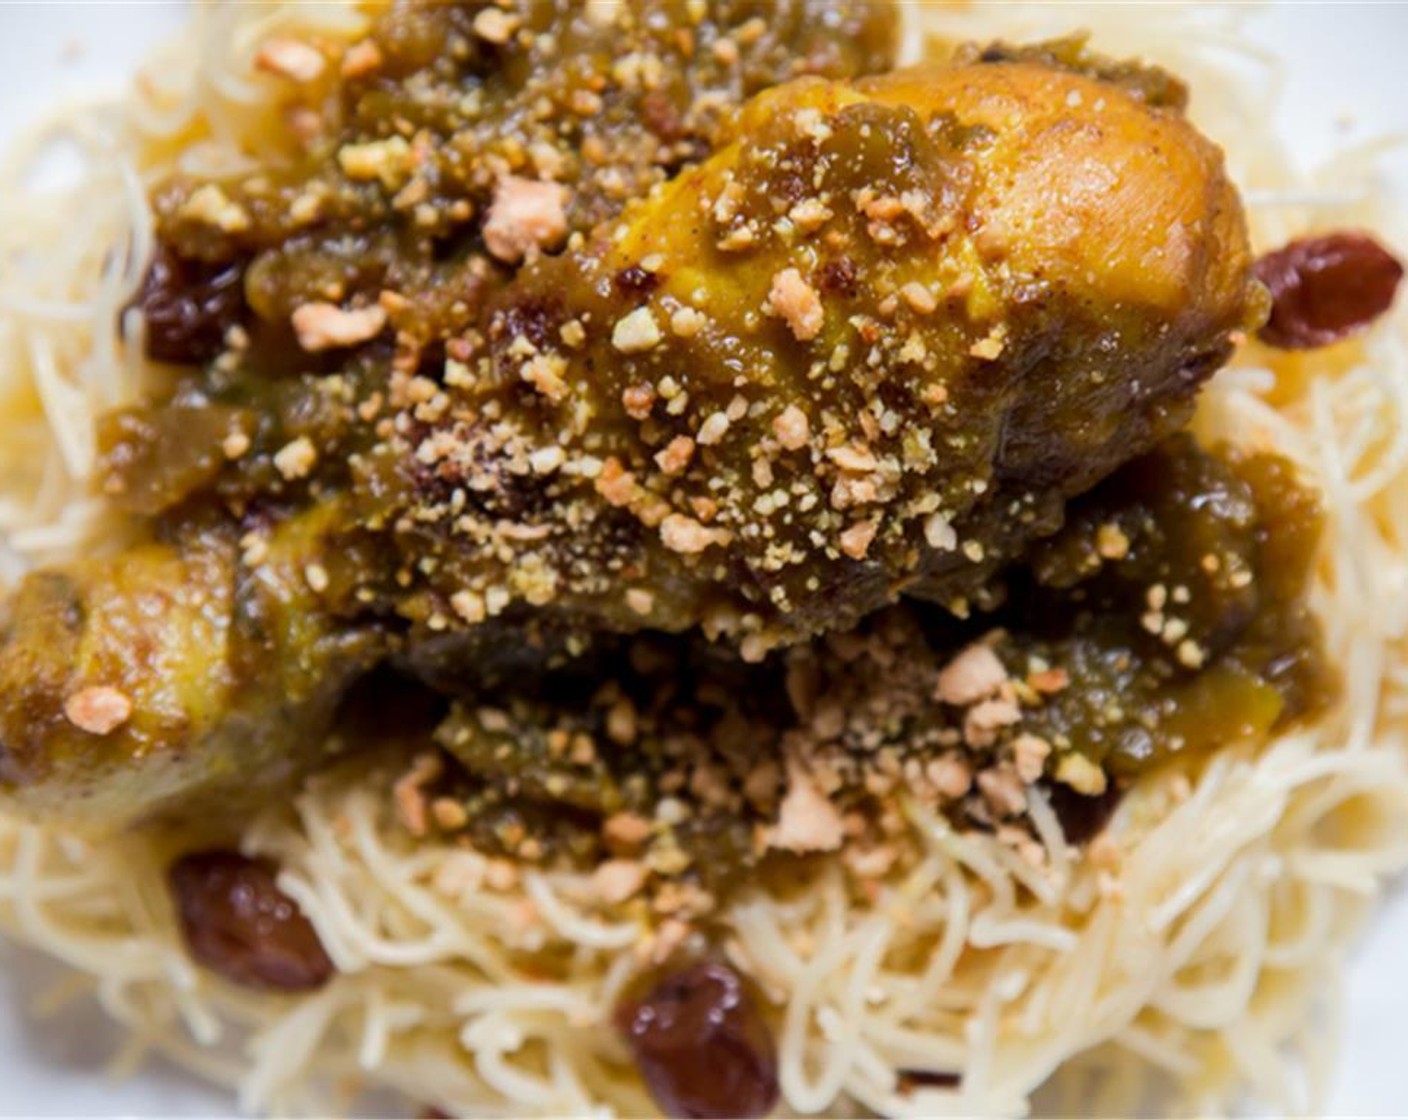 step 14 Place the vermicelli (mixed with raisins) on a plate and top with the chicken, the onion sauce, Roasted Almonds (3/4 cup) and sprinkle the top with Ground Cinnamon (to taste) and Powdered Confectioners Sugar (to taste).